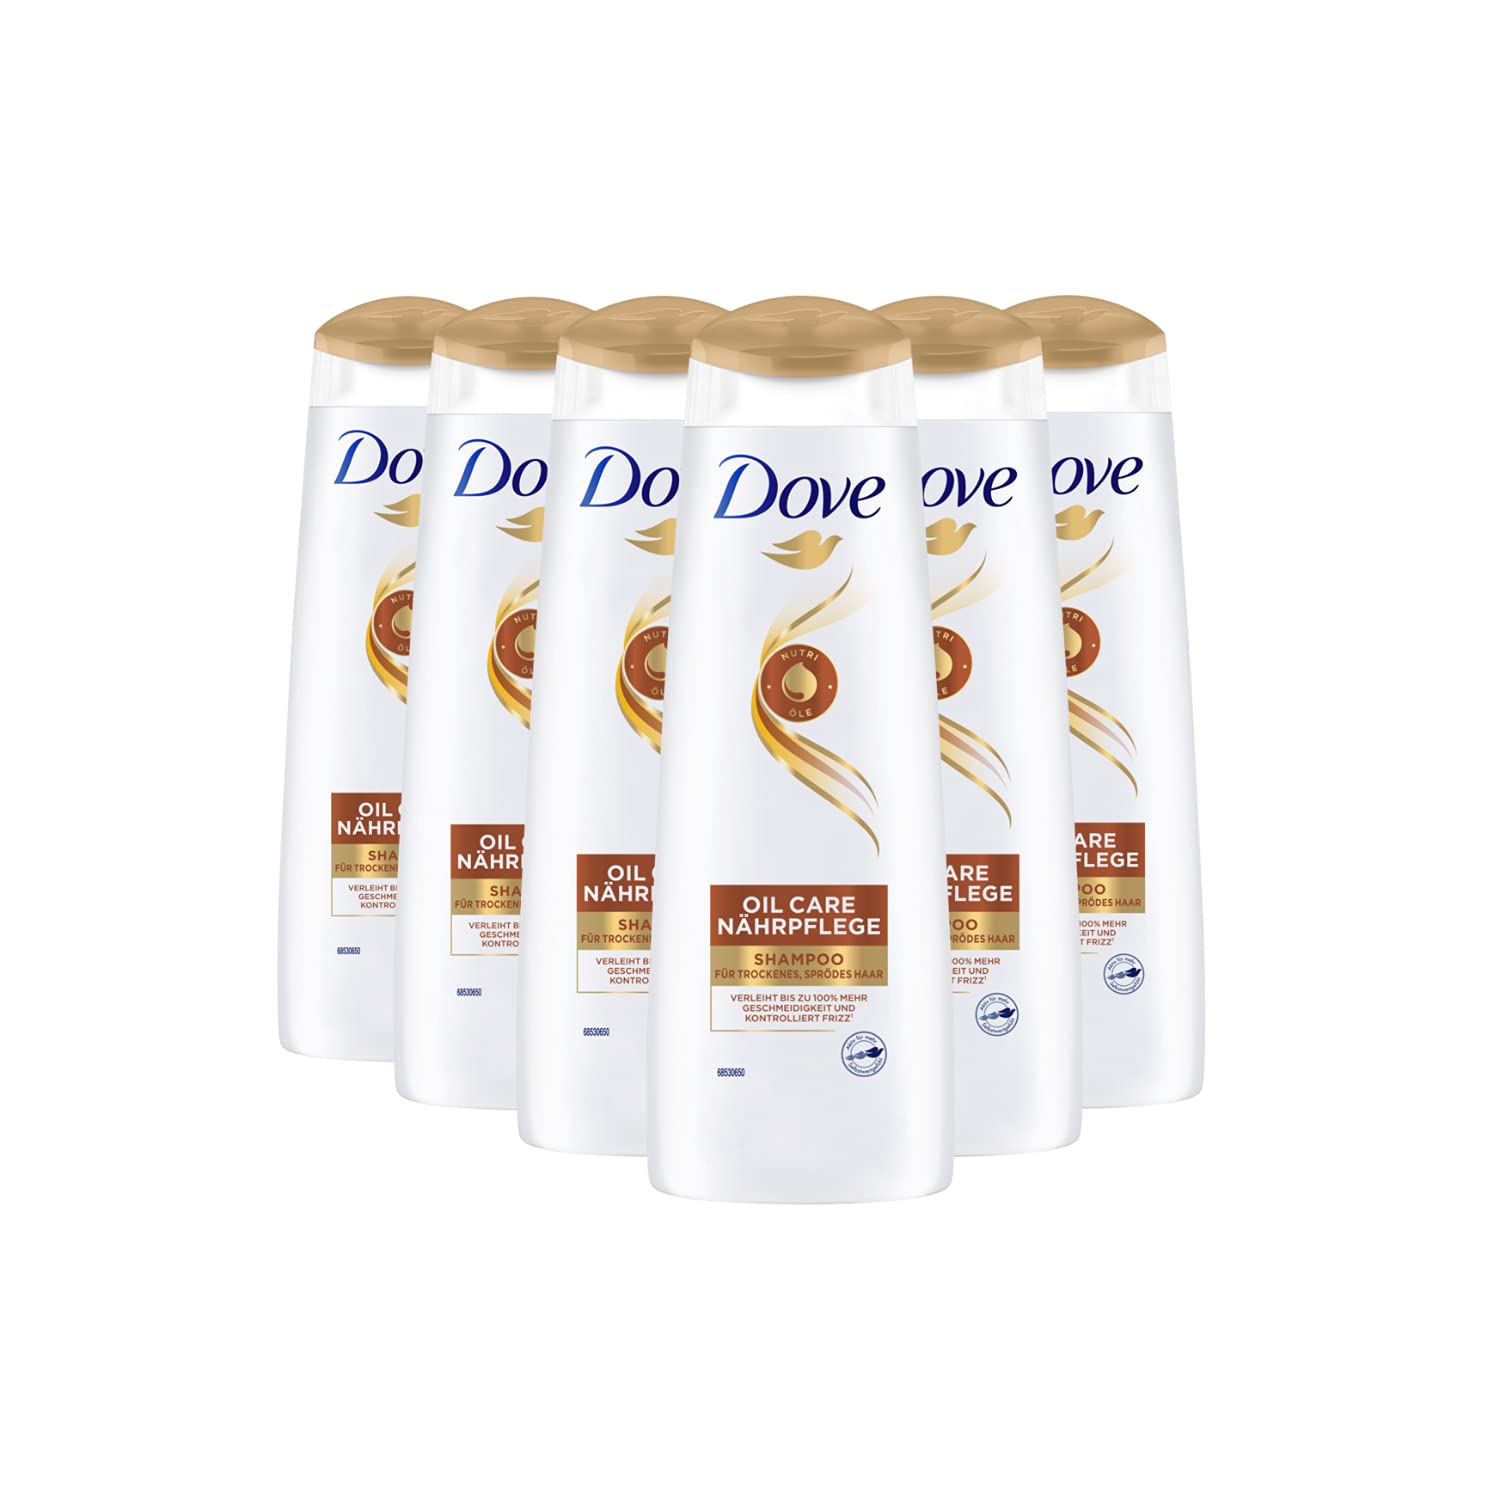 Dove Oil Care Nutritional Care, Hair Care Shampoo, Pack of 6 (6 x 250 ml)